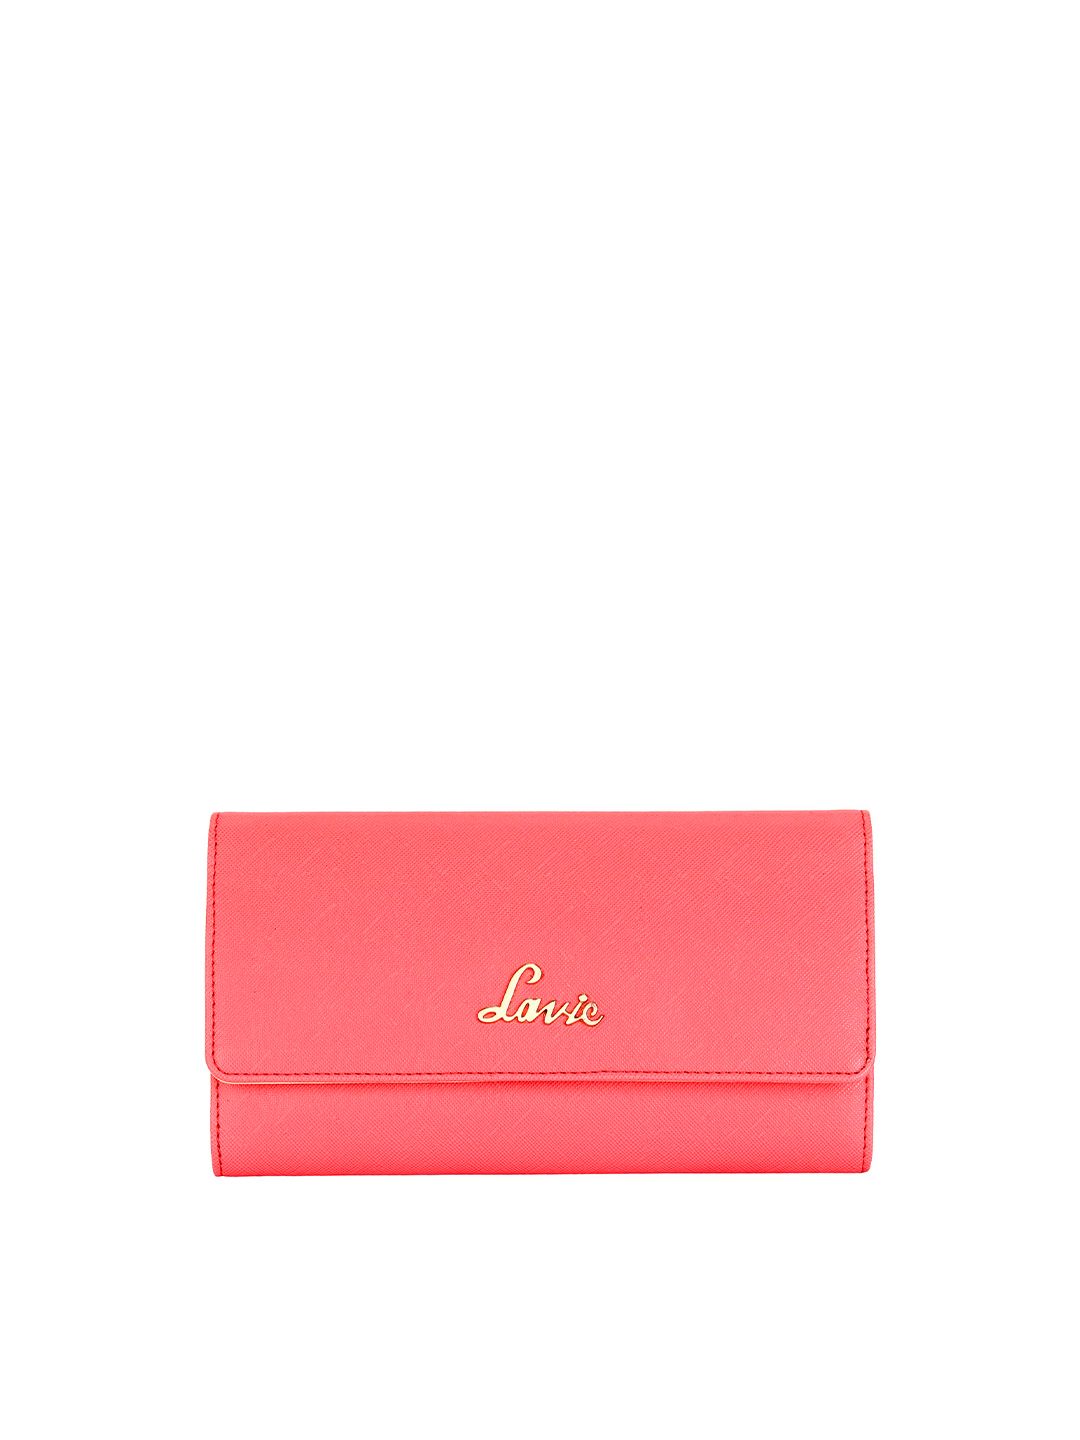 Lavie Women Pink & Gold-Toned Textured PU Envelope Price in India